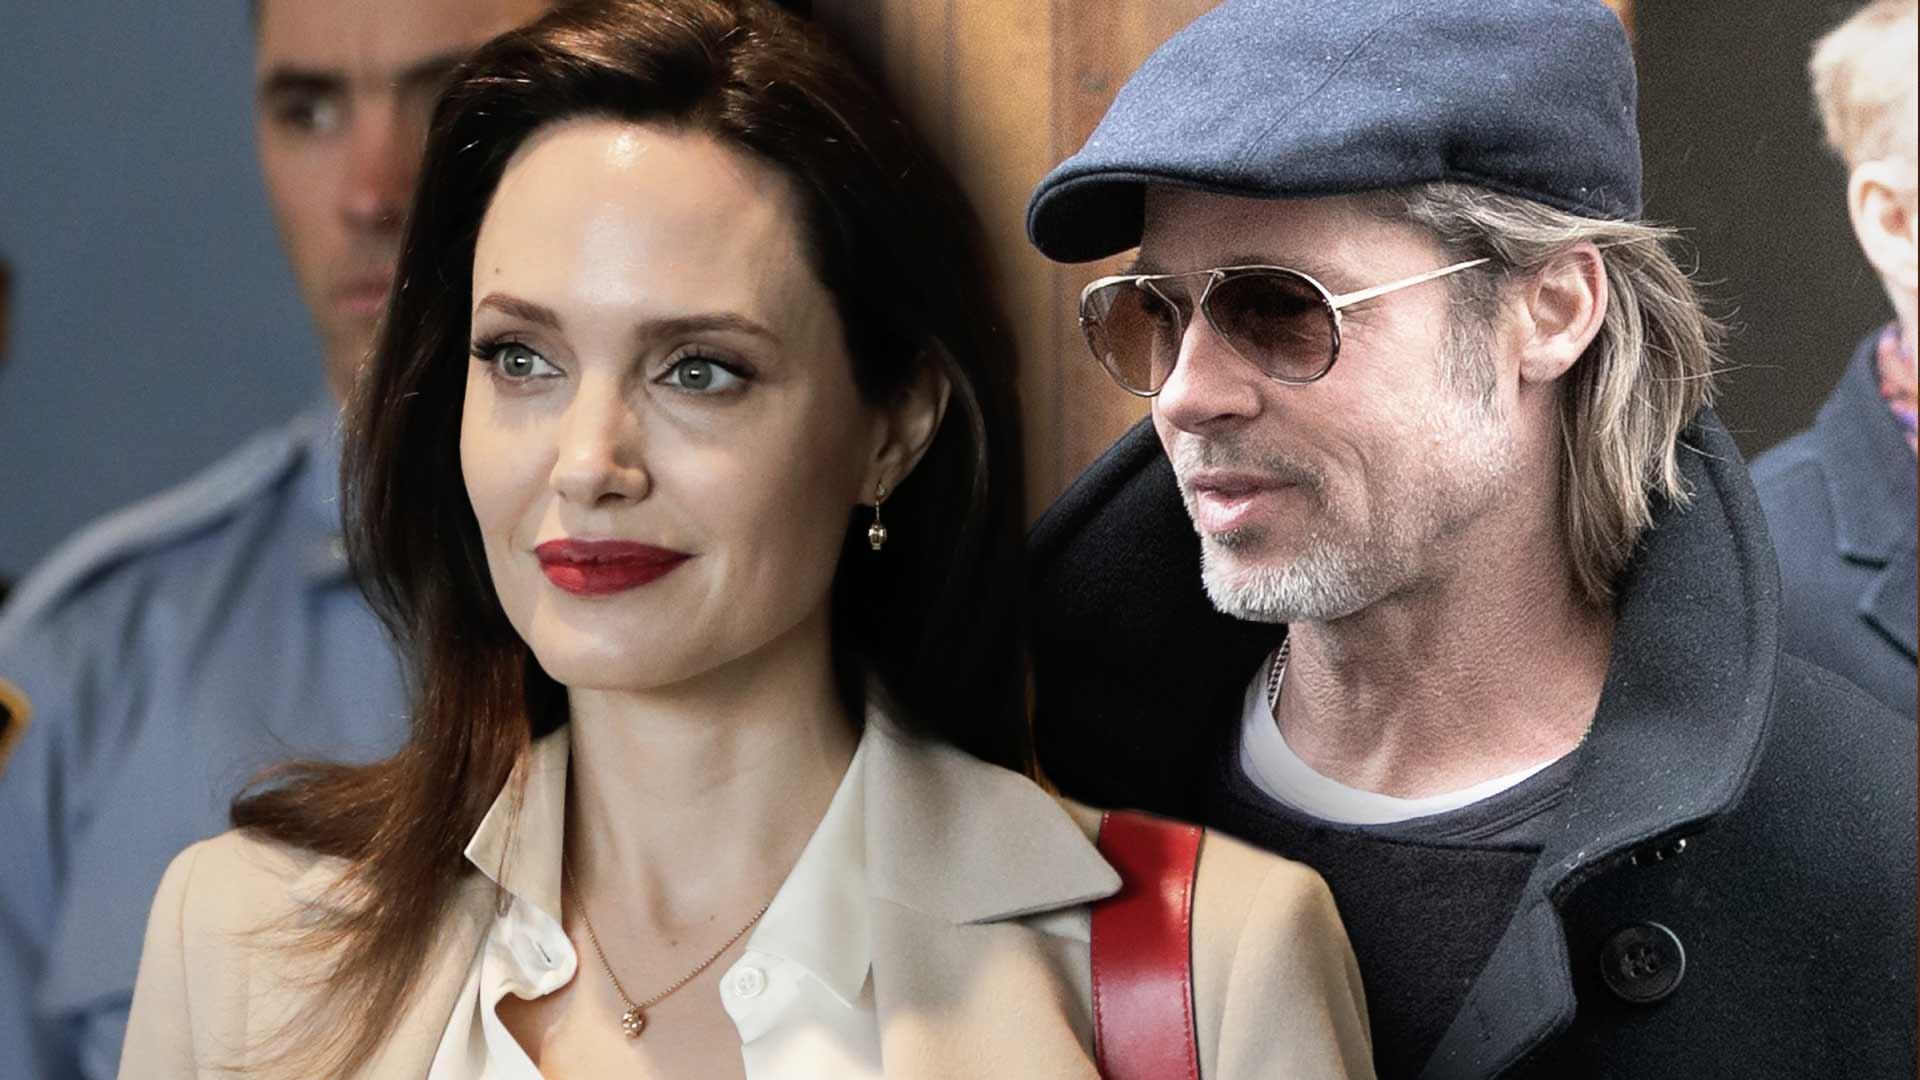 Angelina Jolie’s Life No Longer in the ‘Pitts’ … Gets Old Name Restored